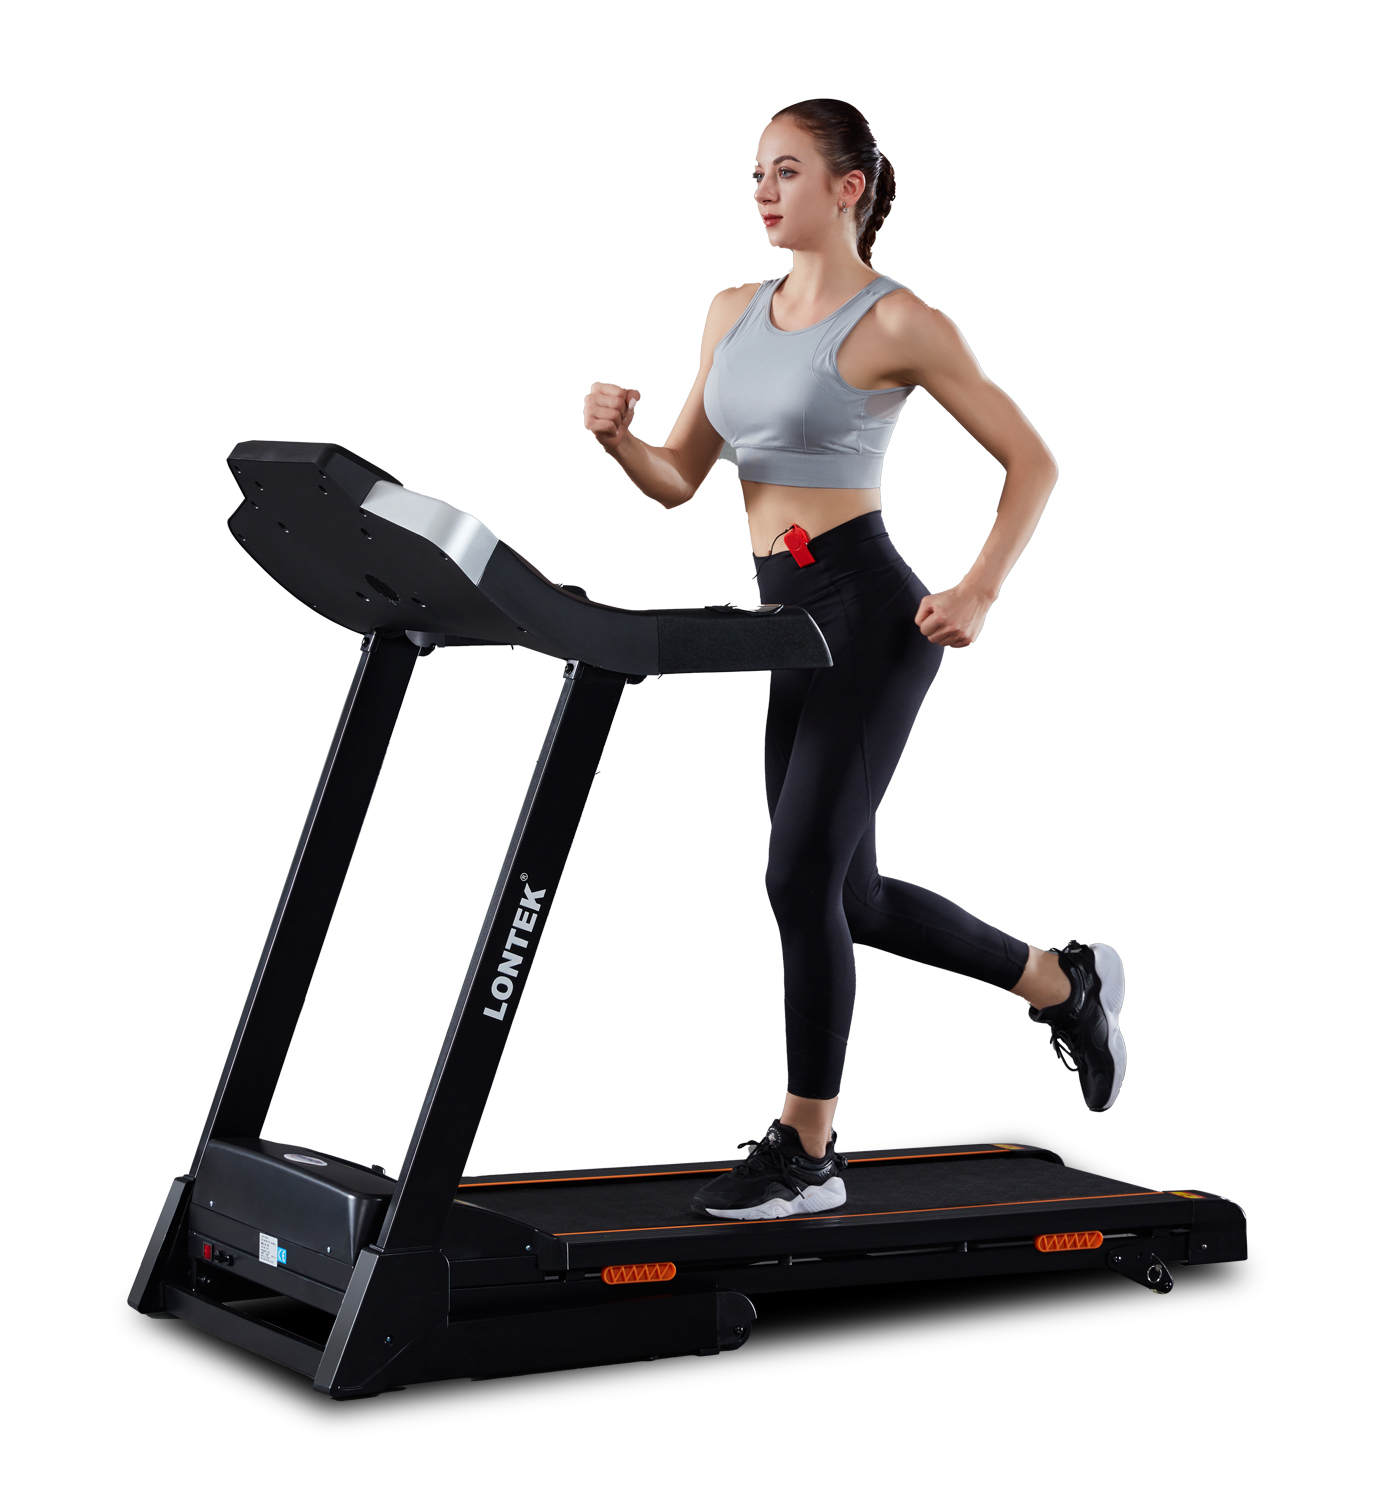 Folding Treadmill for Home Gym Exercise,Perform Treadmill with Incline  Calories Monitor,Motorized Running Machine with SPAX APP  Cup Holder-Boyel Living